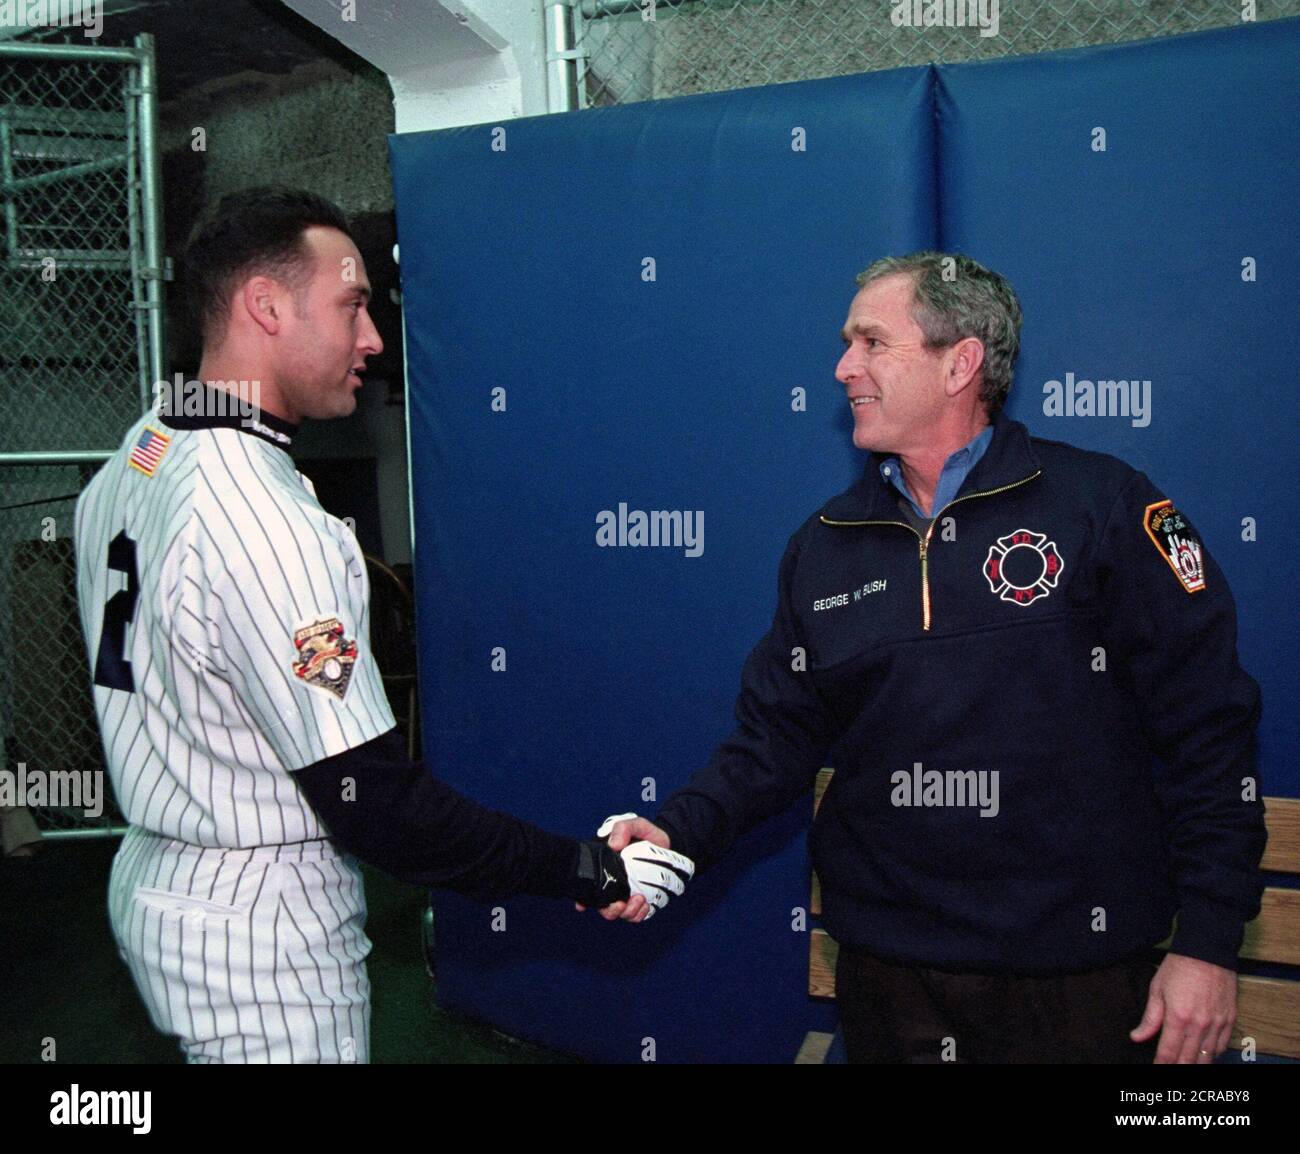 President George W. Bush shakes hands with Yankee shortstop Derek Jeter Tuesday Oct. 30, 2001, prior to throwing out the ceremonial first pitch in Game Three of the World Series between the Arizona Diamondbacks and the New York Yankees at Yankee Stadium in New York City. Stock Photo